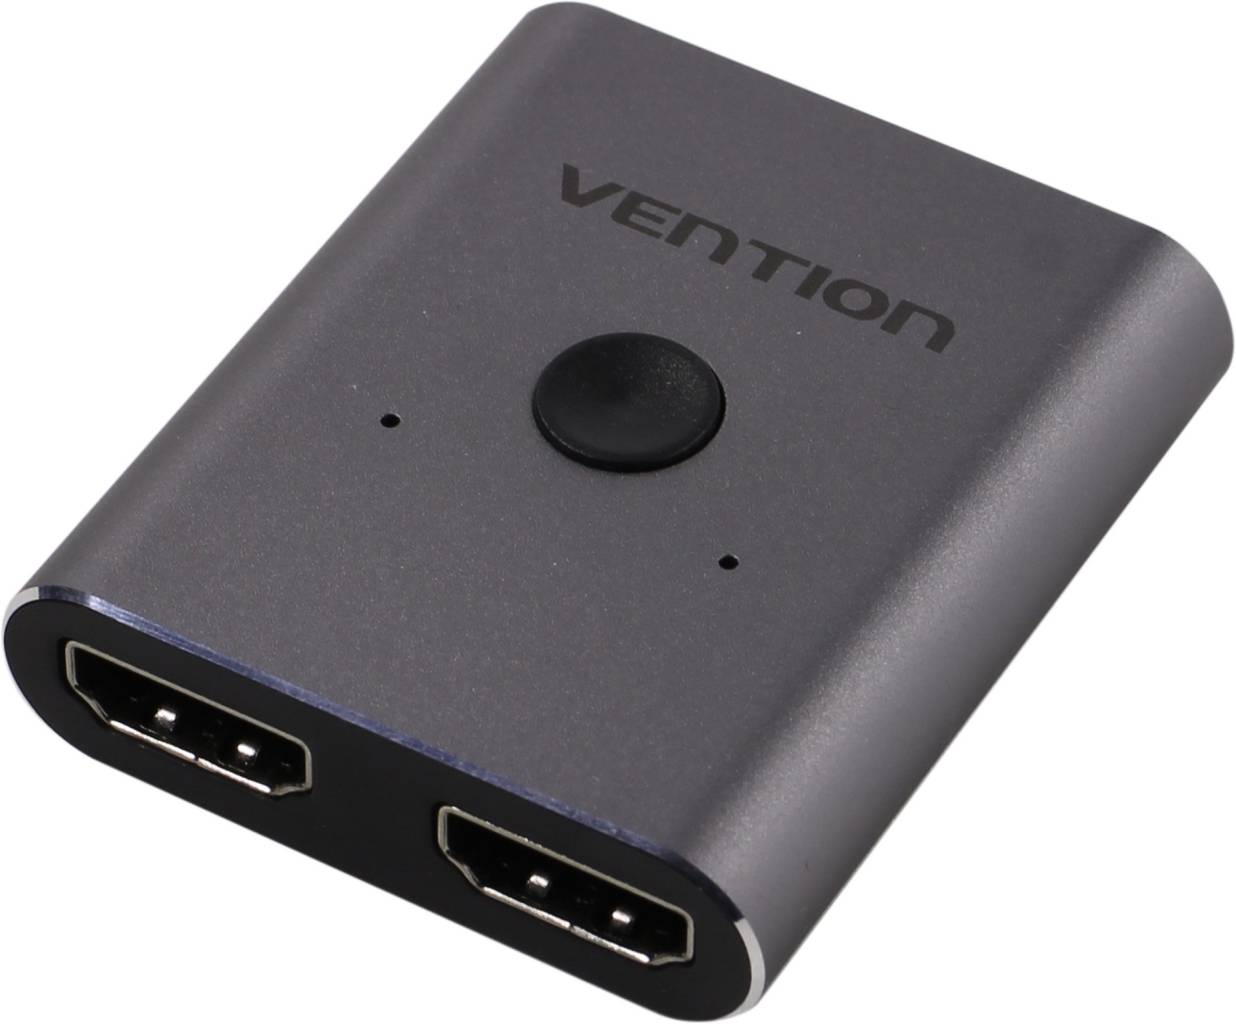   Vention [AFUH0] 2-port HDMI Bi-direction Switch (1in - > 2out, 2in - > 1out)